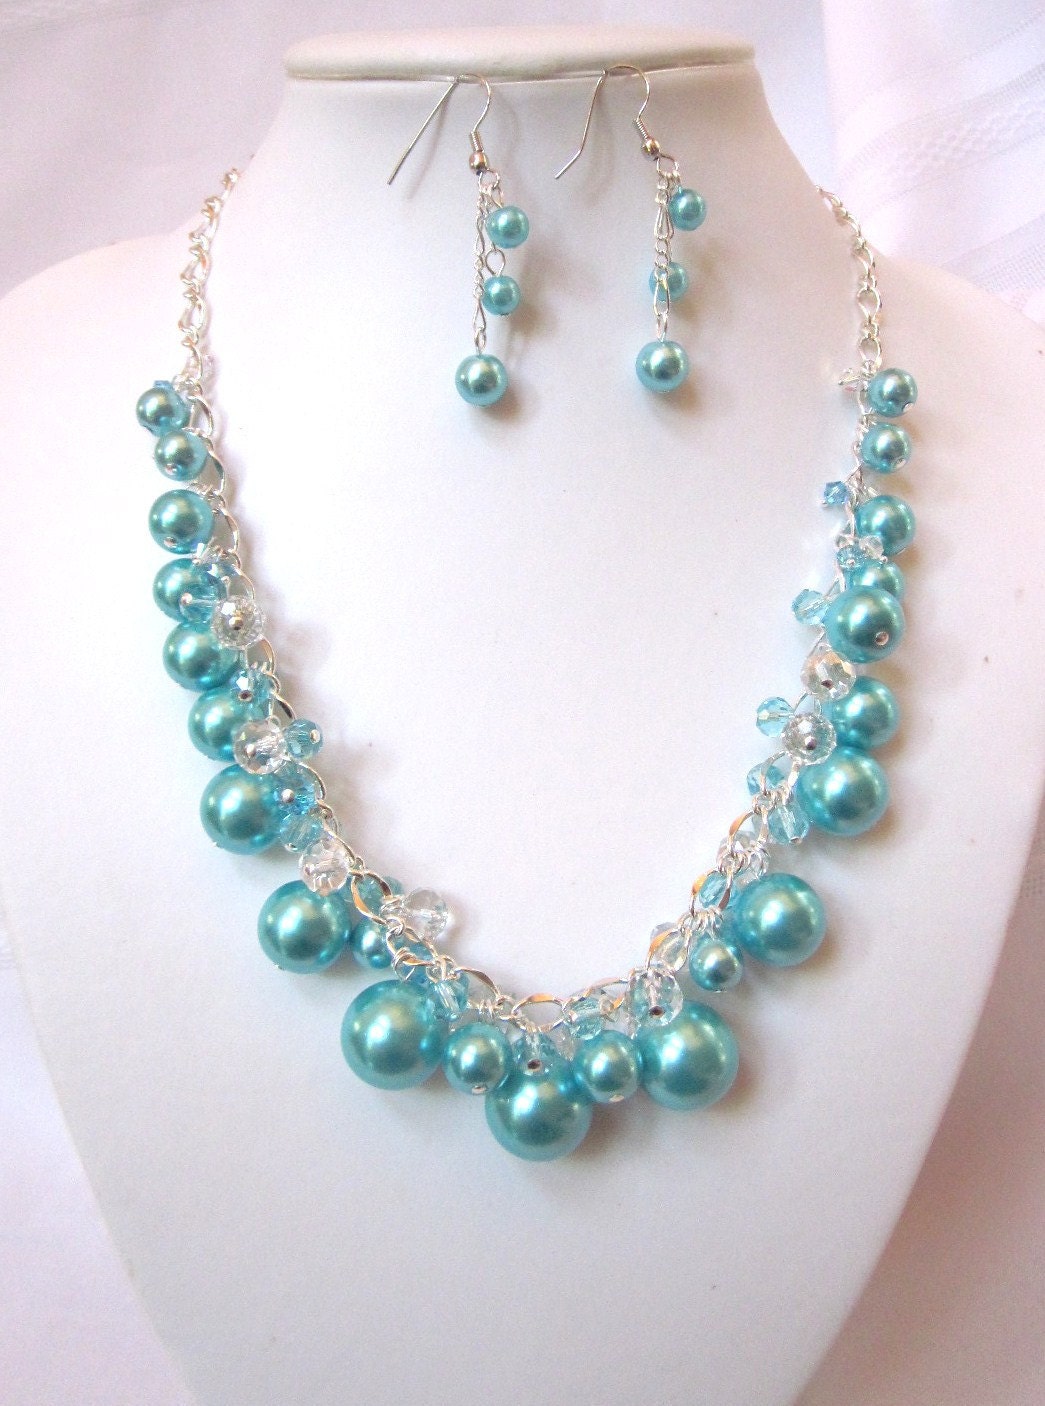 Pearl and Crystal Cluster Necklace Terrific Turquoise Color - Etsy